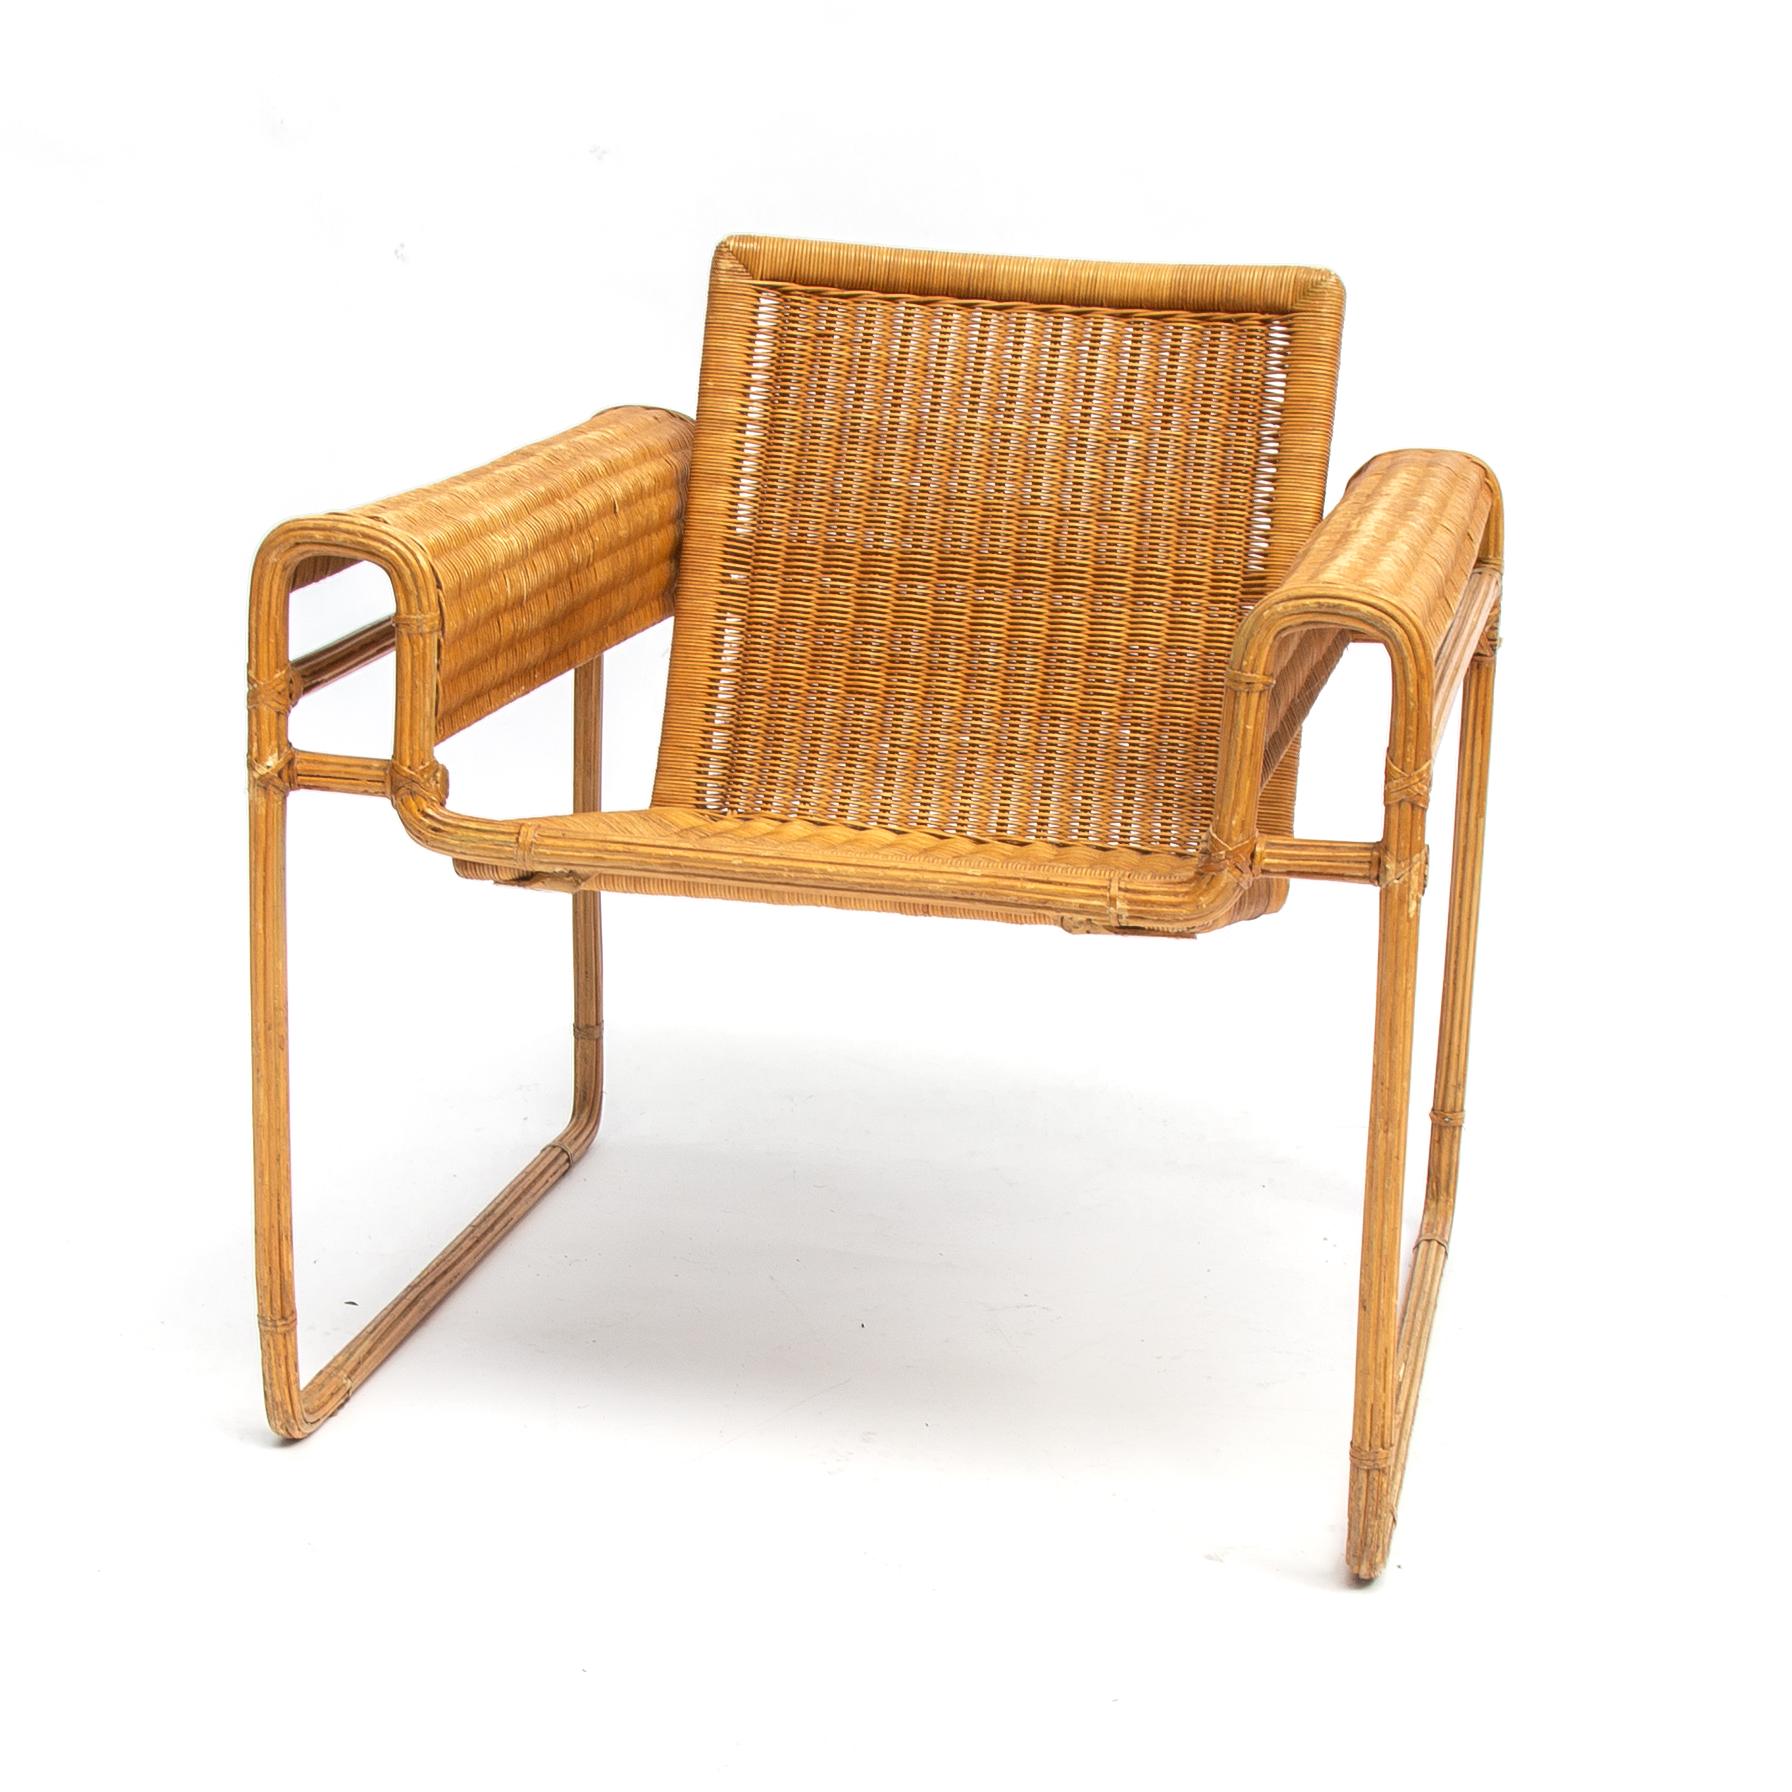 Rare and absolute unique translation of the original Wassily chair by Marcel Breuer, The metal frame owns covered with strips if lacquered bamboo, seating and beck are handmade wicker.

The Wassily chair, inspired by the frame of a bicycle and